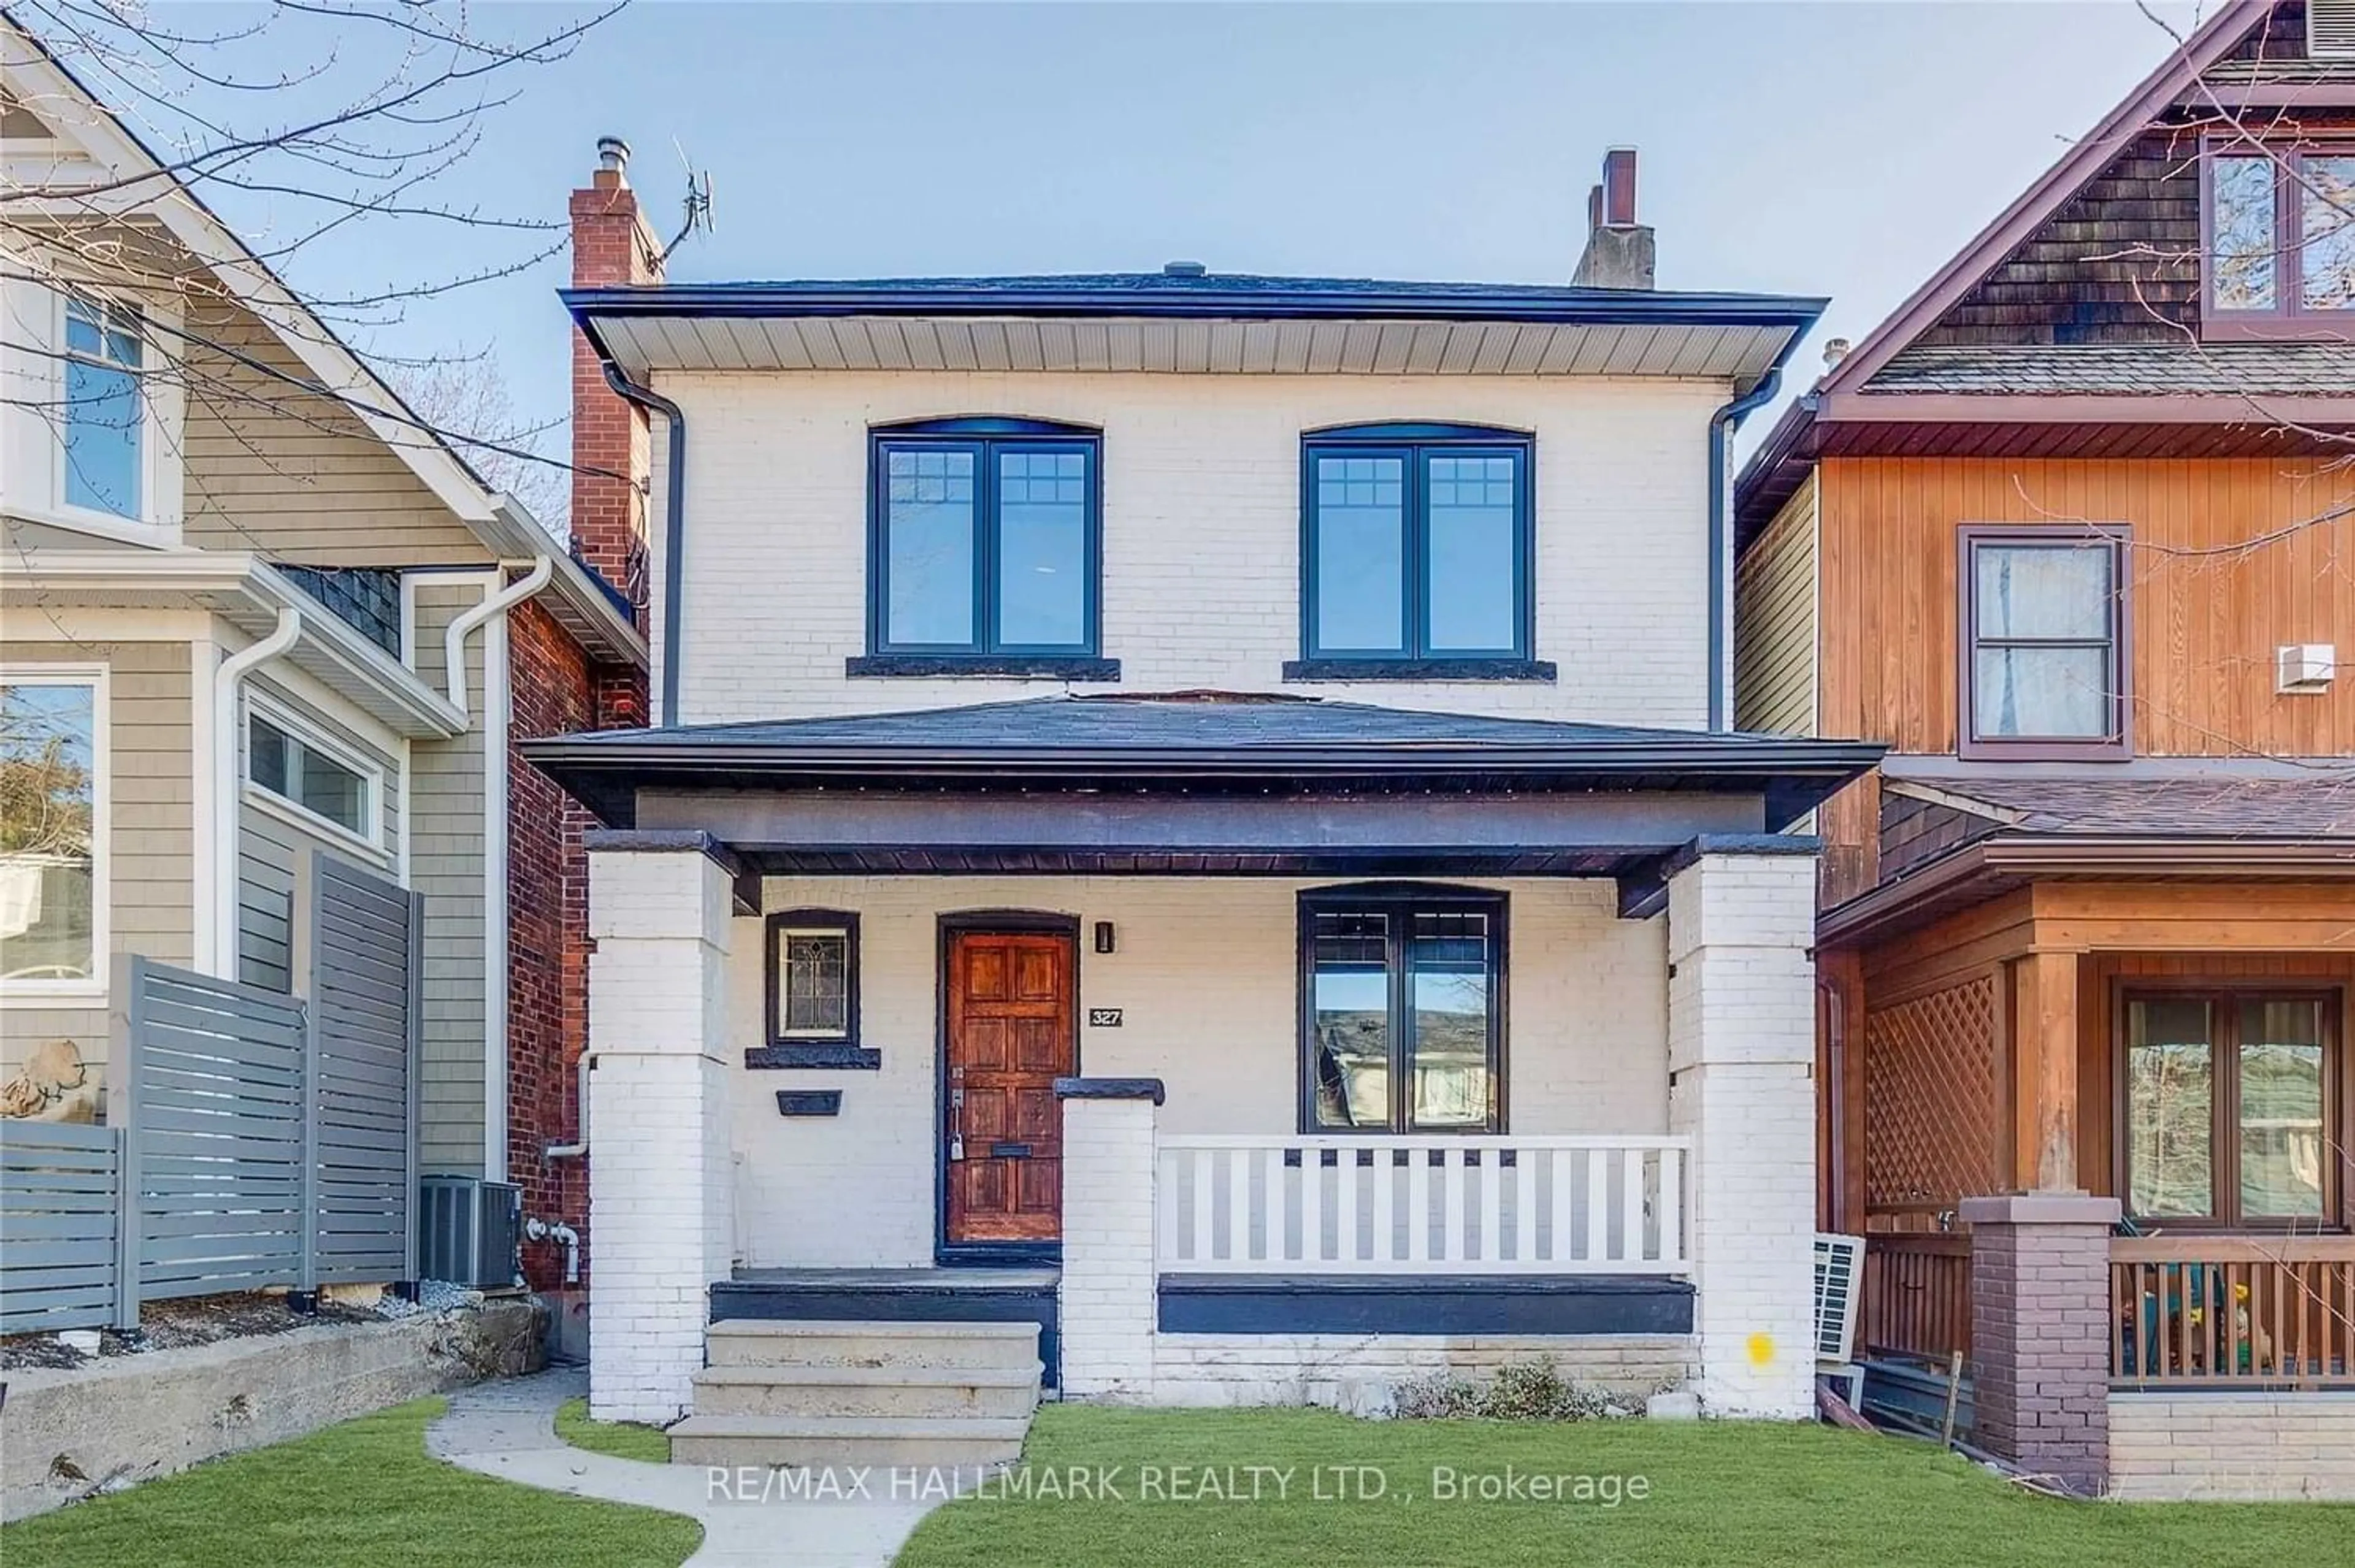 Frontside or backside of a home for 327 Kenilworth Ave, Toronto Ontario M4L 3S9